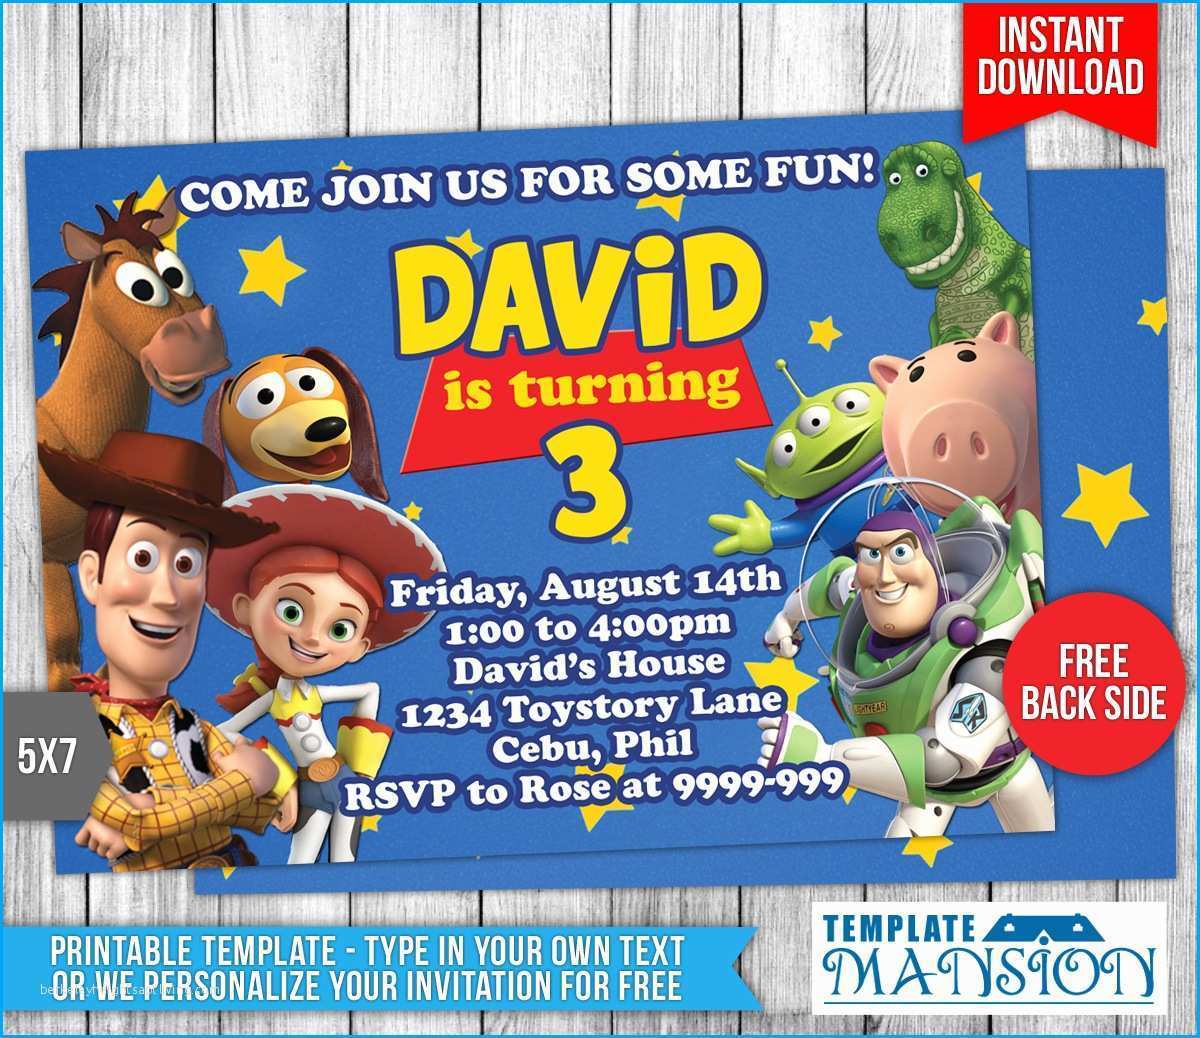 Toy Story Birthday Invitation Template - Cards Design Templates